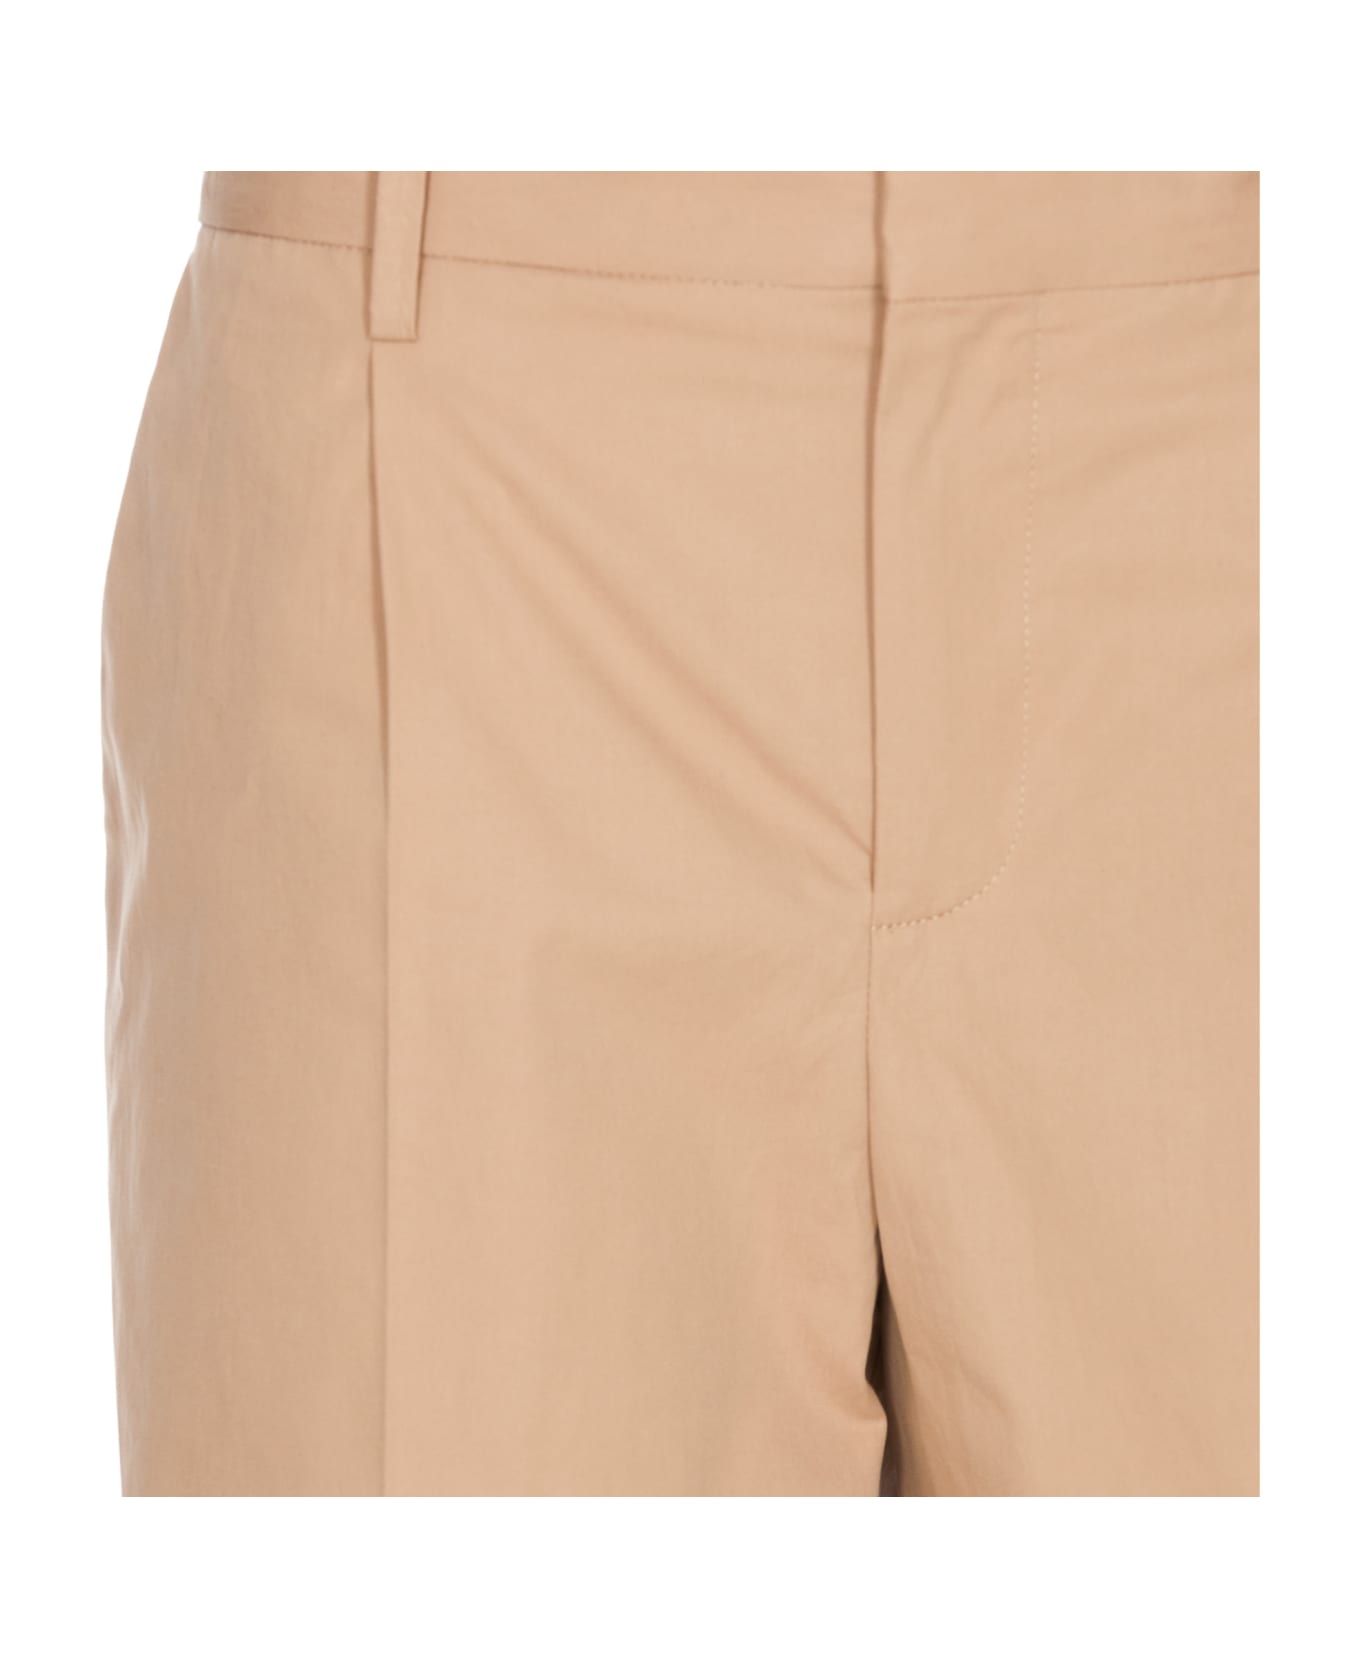 A.P.C. Cotton Shorts 'terry' - Beige Fonce ショートパンツ